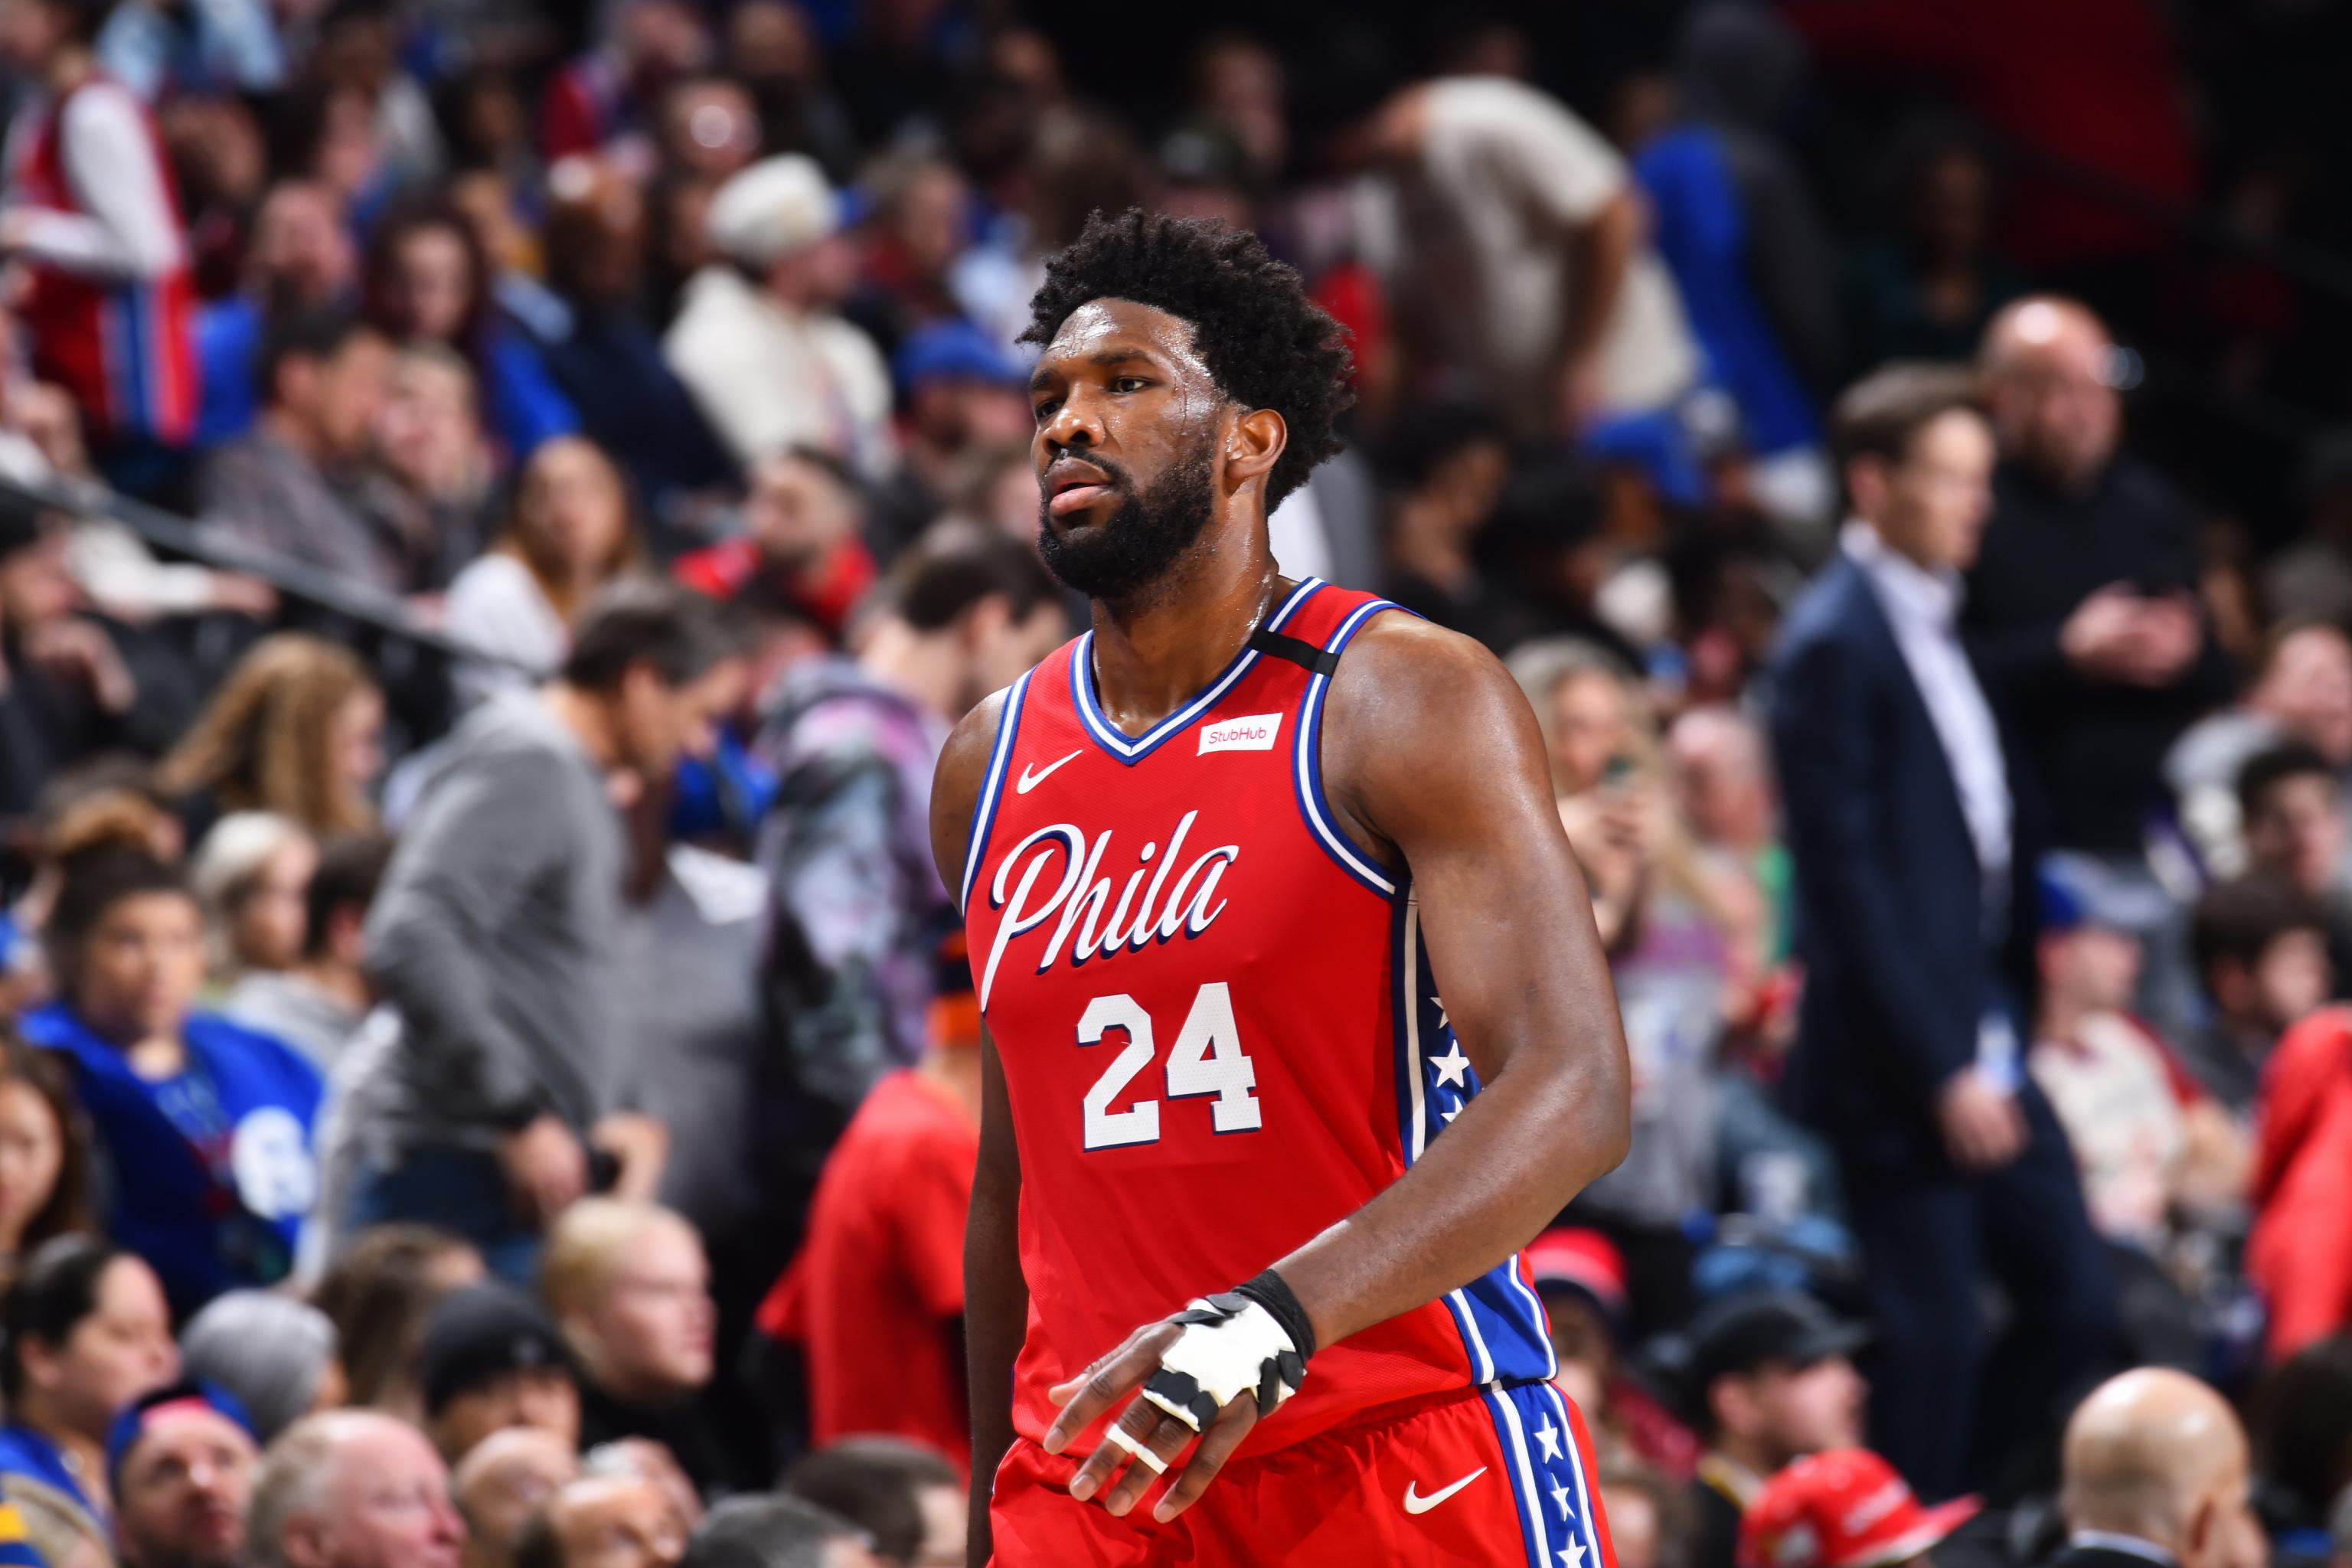 Joel Embiid Scores 24 in Return from Injury as 76ers Beat Warriors